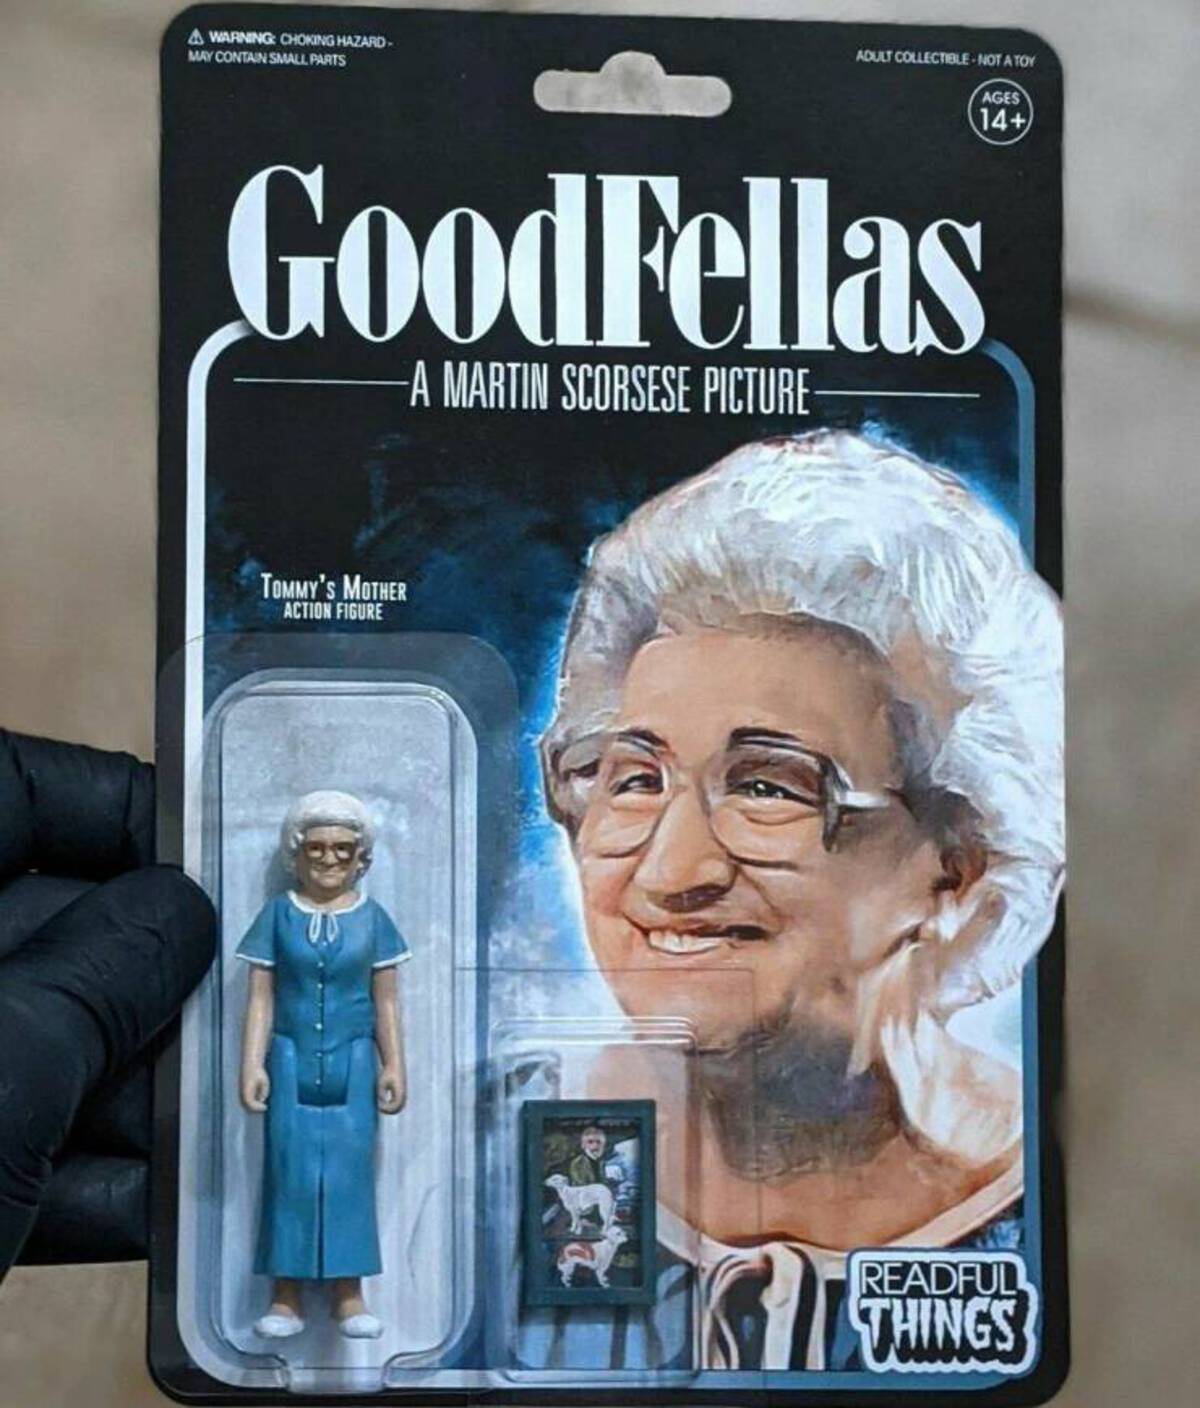 scorsese action figure - Awarning Choking Hazard May Contain Small Parts Adult CollectibleNot A Toy Ages 14 GoodFellas A Martin Scorsese Picture Tommy'S Mother Action Figure Readful Things